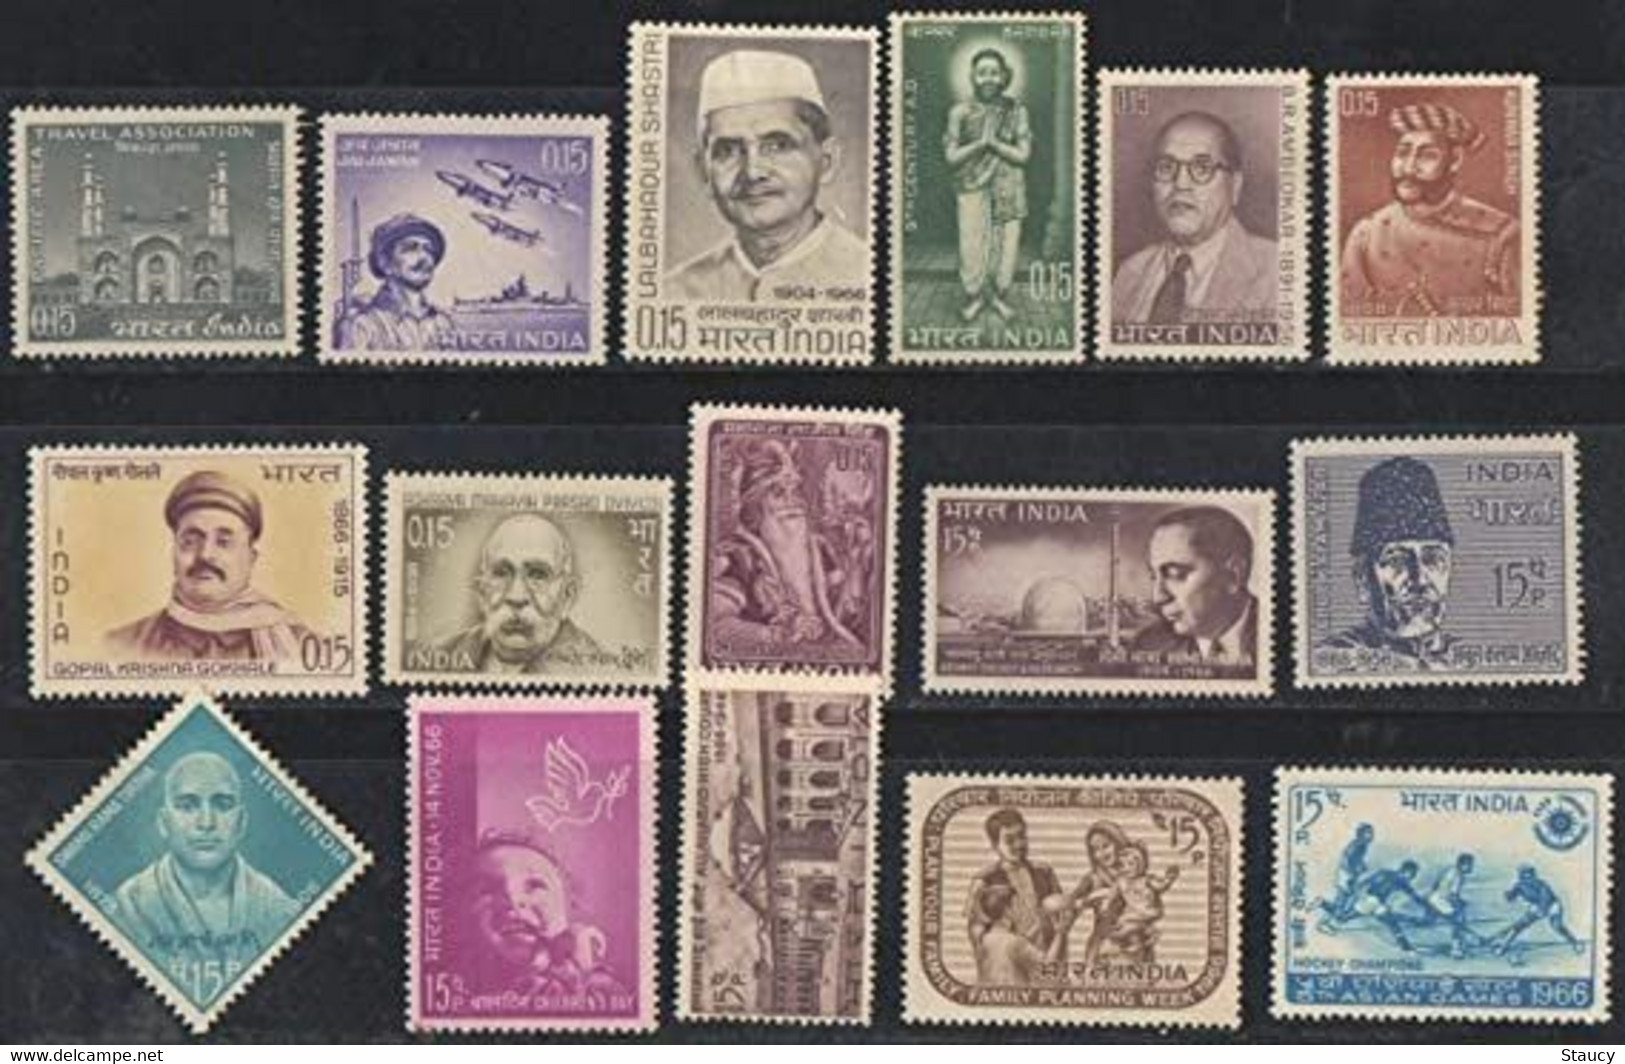 India 1966 Complete Year Pack / Set / Collection Total 16 Stamps (No Missing) MNH As Per Scan - Años Completos